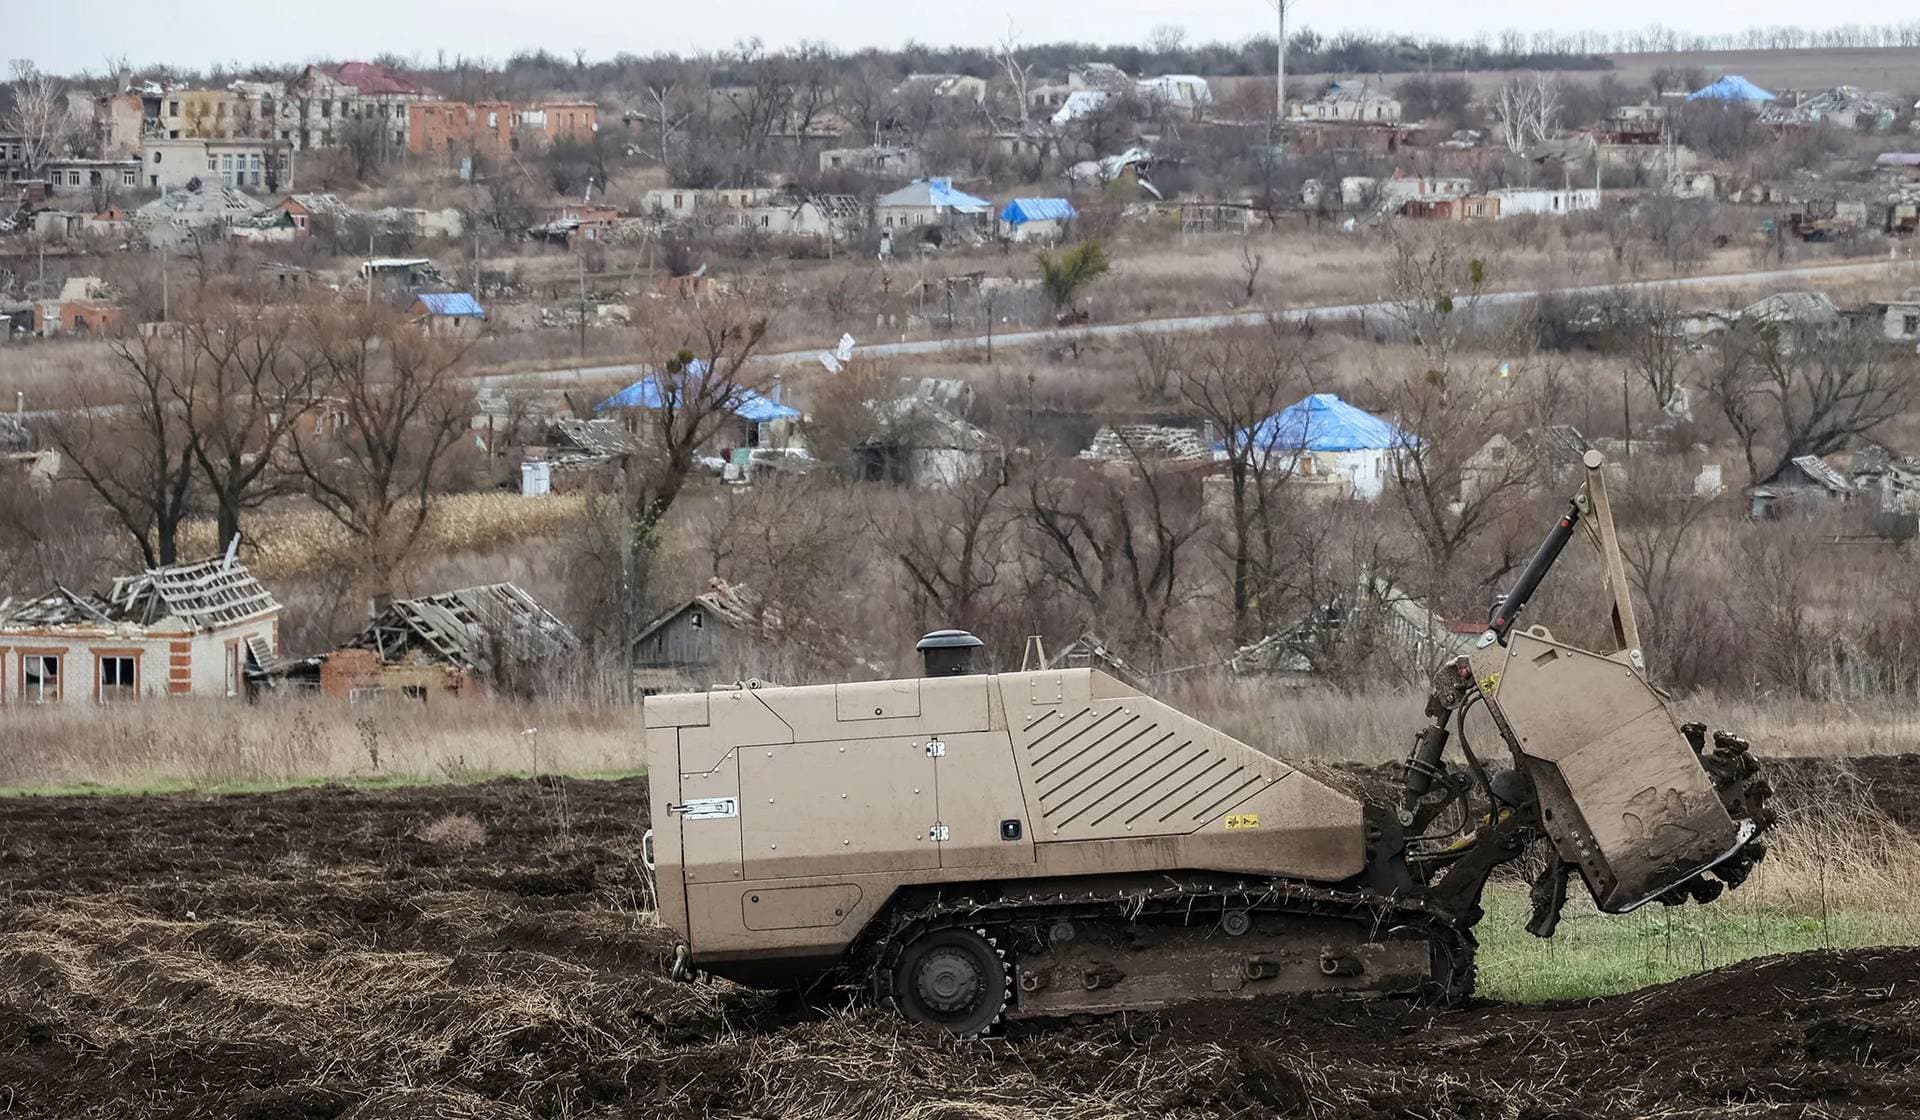 A remote-controlled GCS 200 State Emergency Service deminer vehicle works on a field near the village of Kamianka